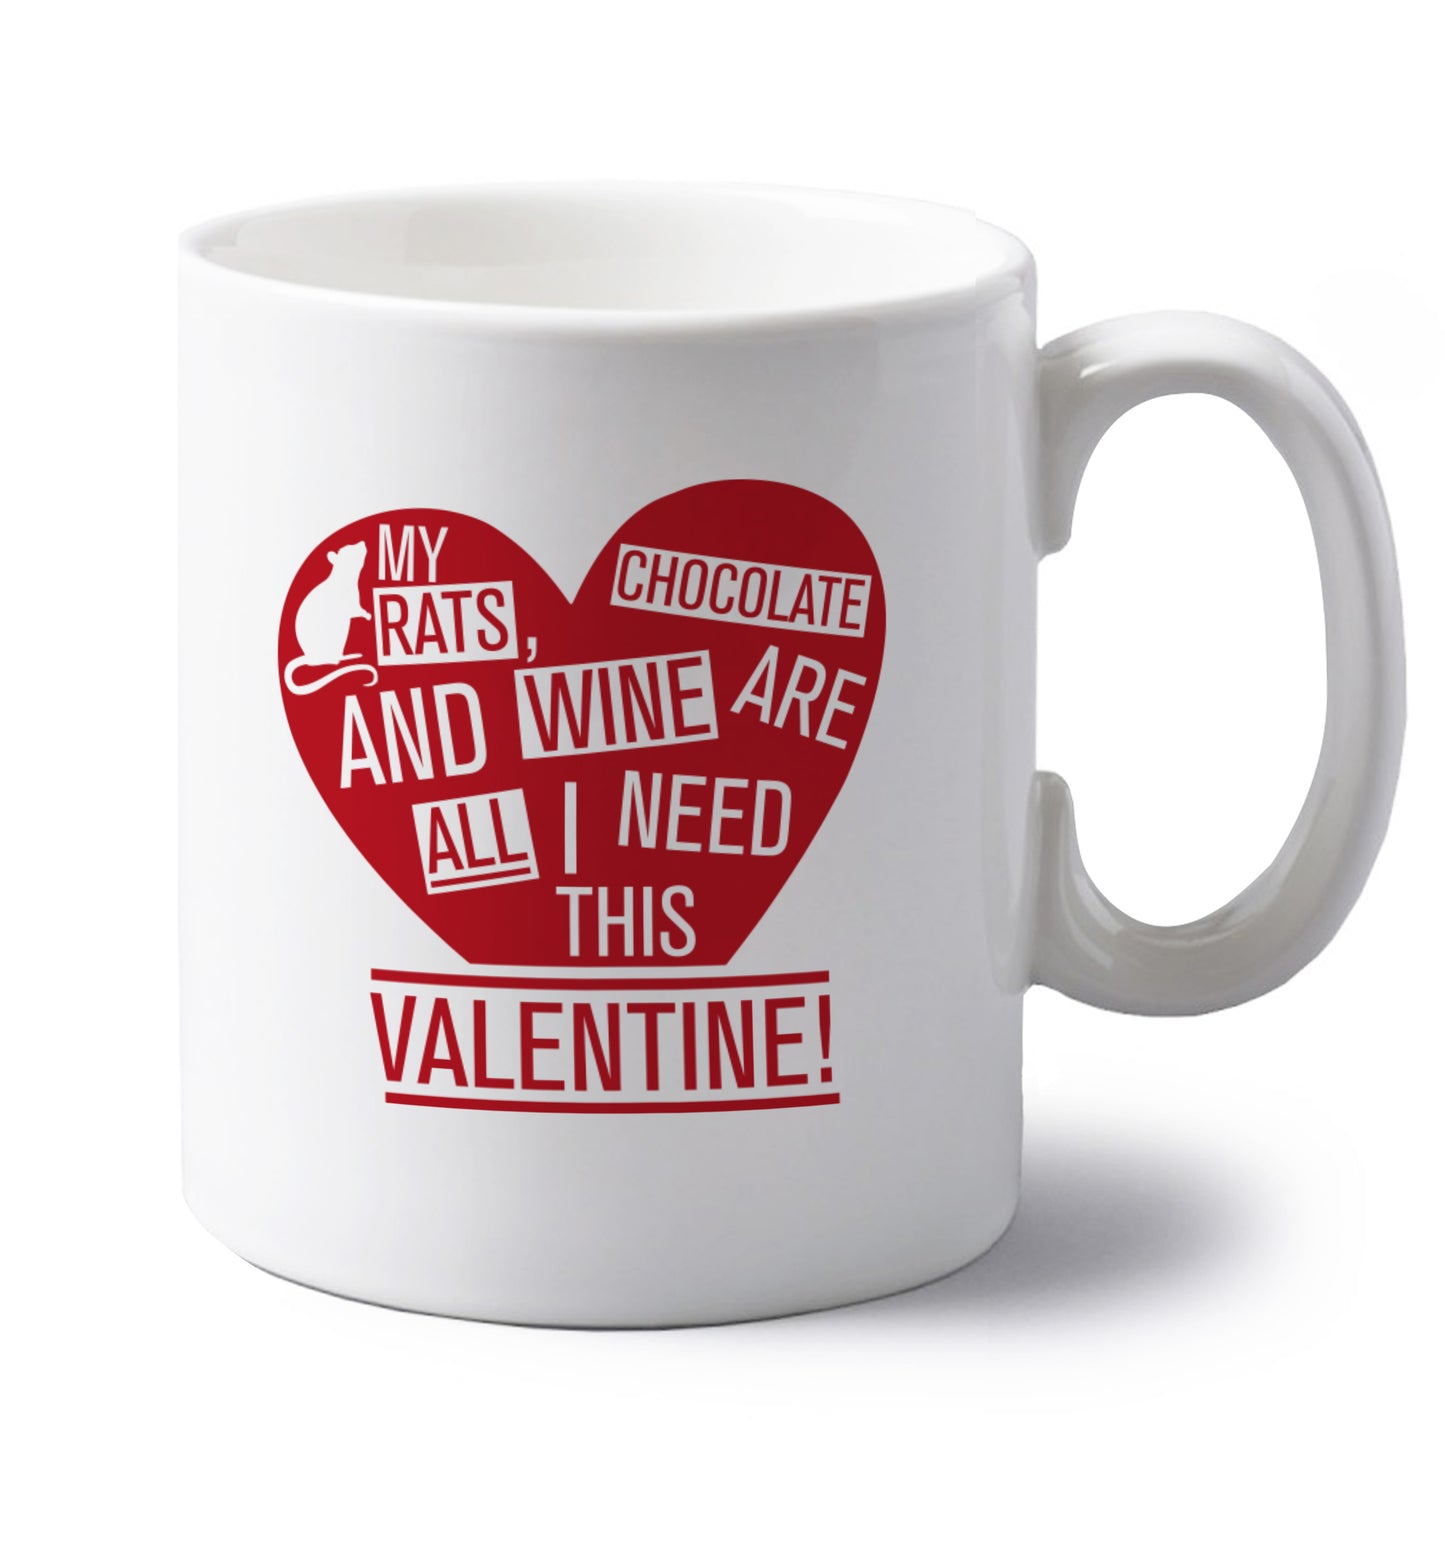 My rats, chocolate and wine are all I need this valentine! left handed white ceramic mug 